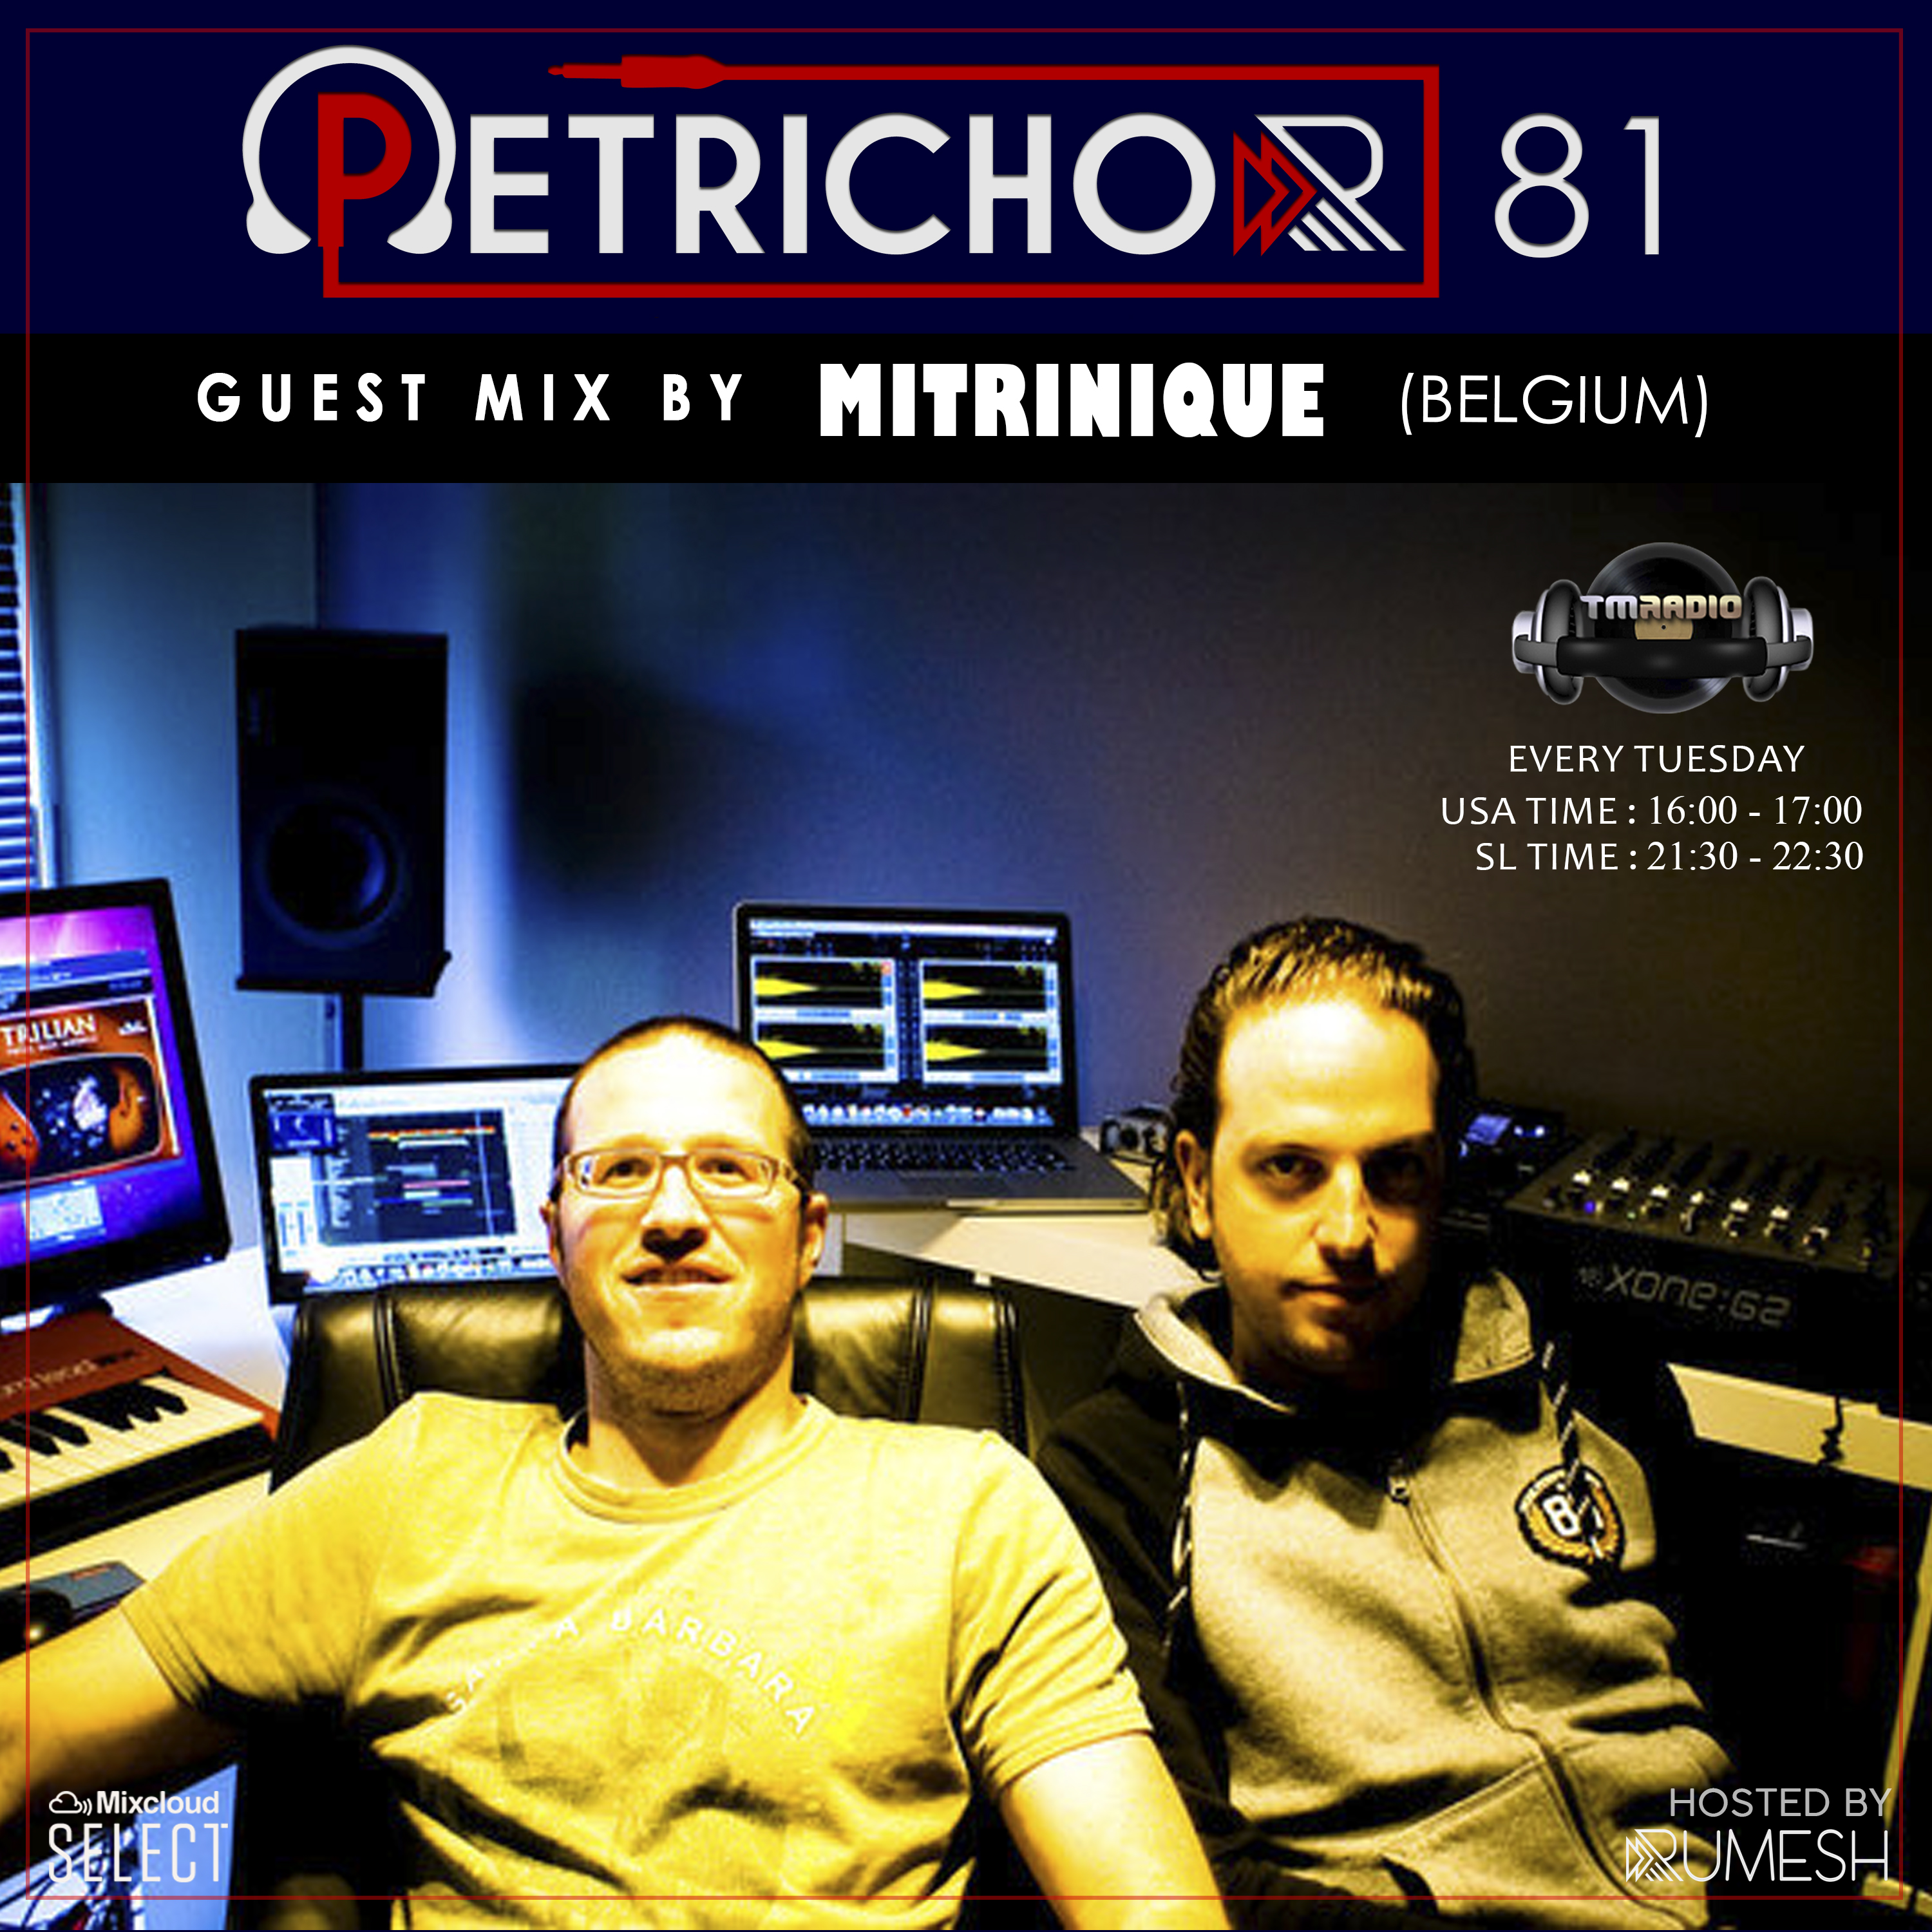 Petrichor :: Petrichor 81 Guest Mix by Mitrinique (Belgium) (aired on May 26th, 2020) banner logo